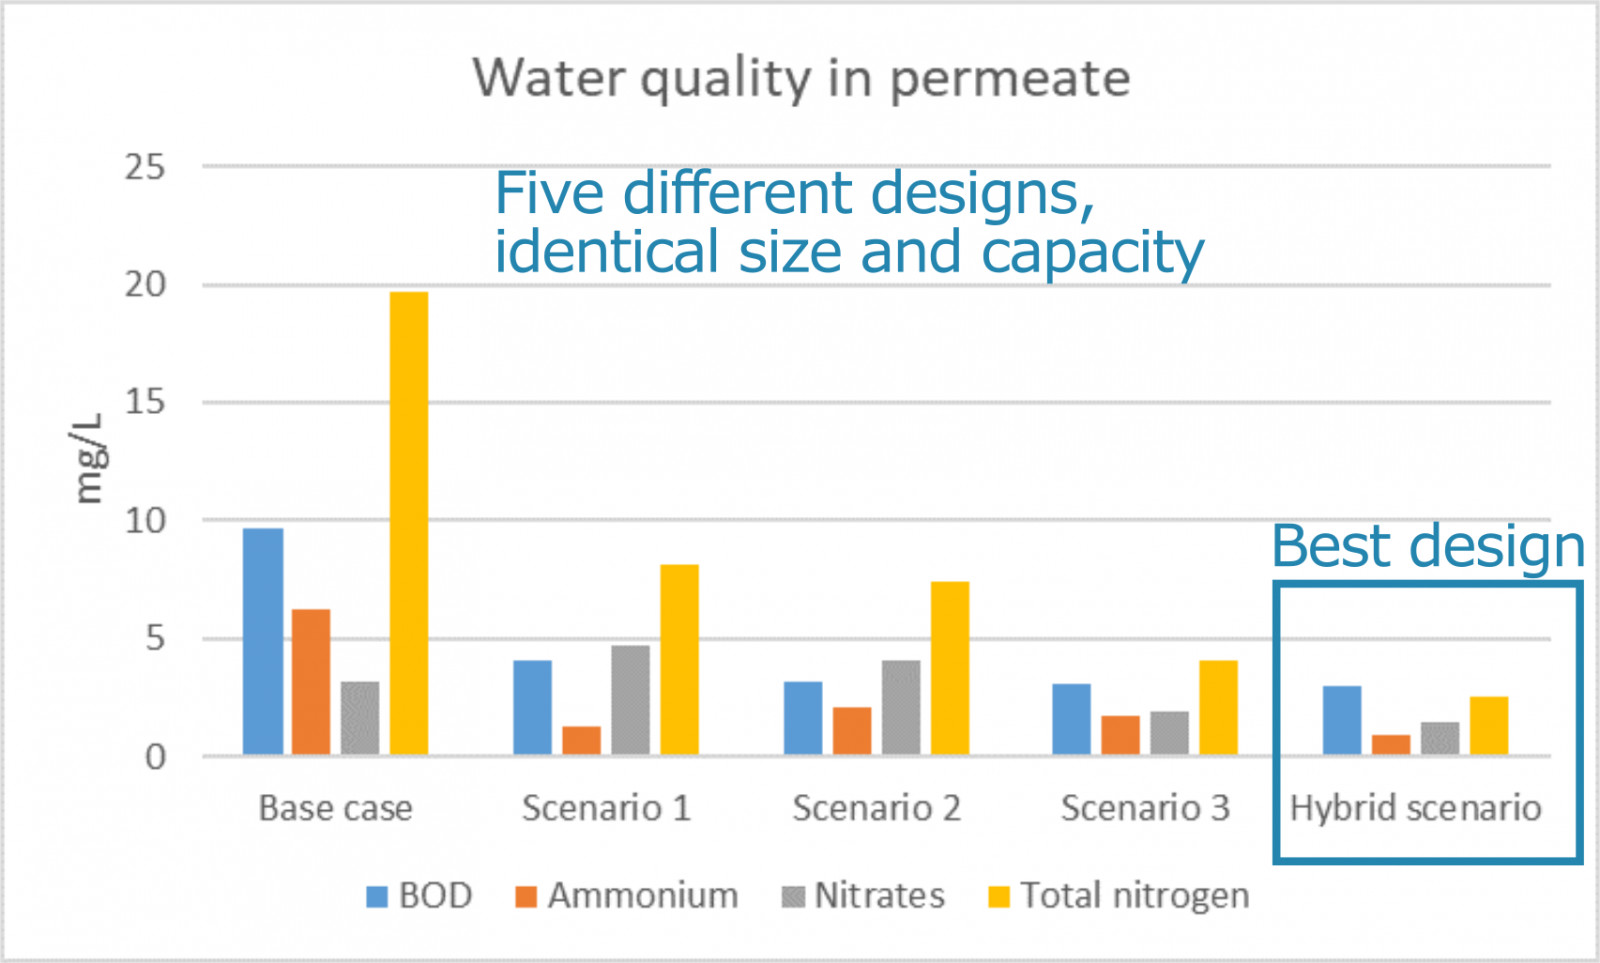 Membrane bioreactor (MBR) permeate quality as function of process design